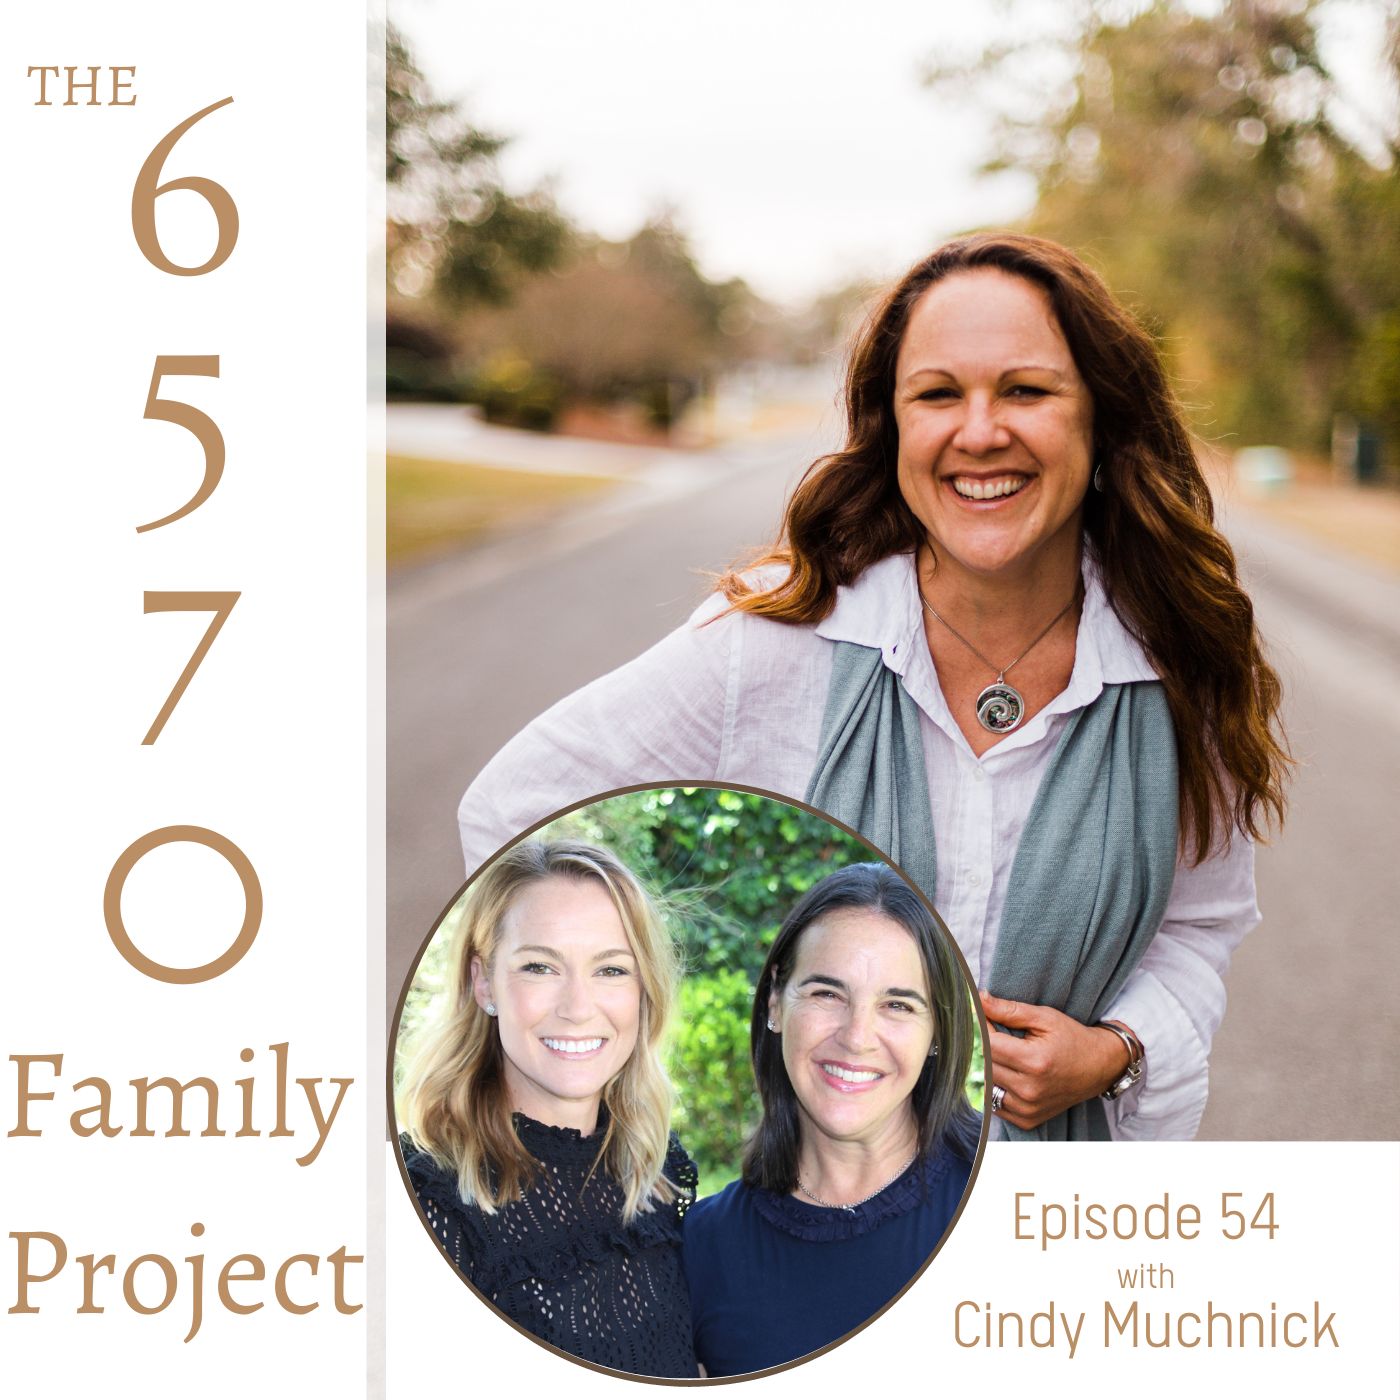 Tips On How To Do This Teen/Tween Parenting Gig from the Pro’s with Guest Cindy Muchnick